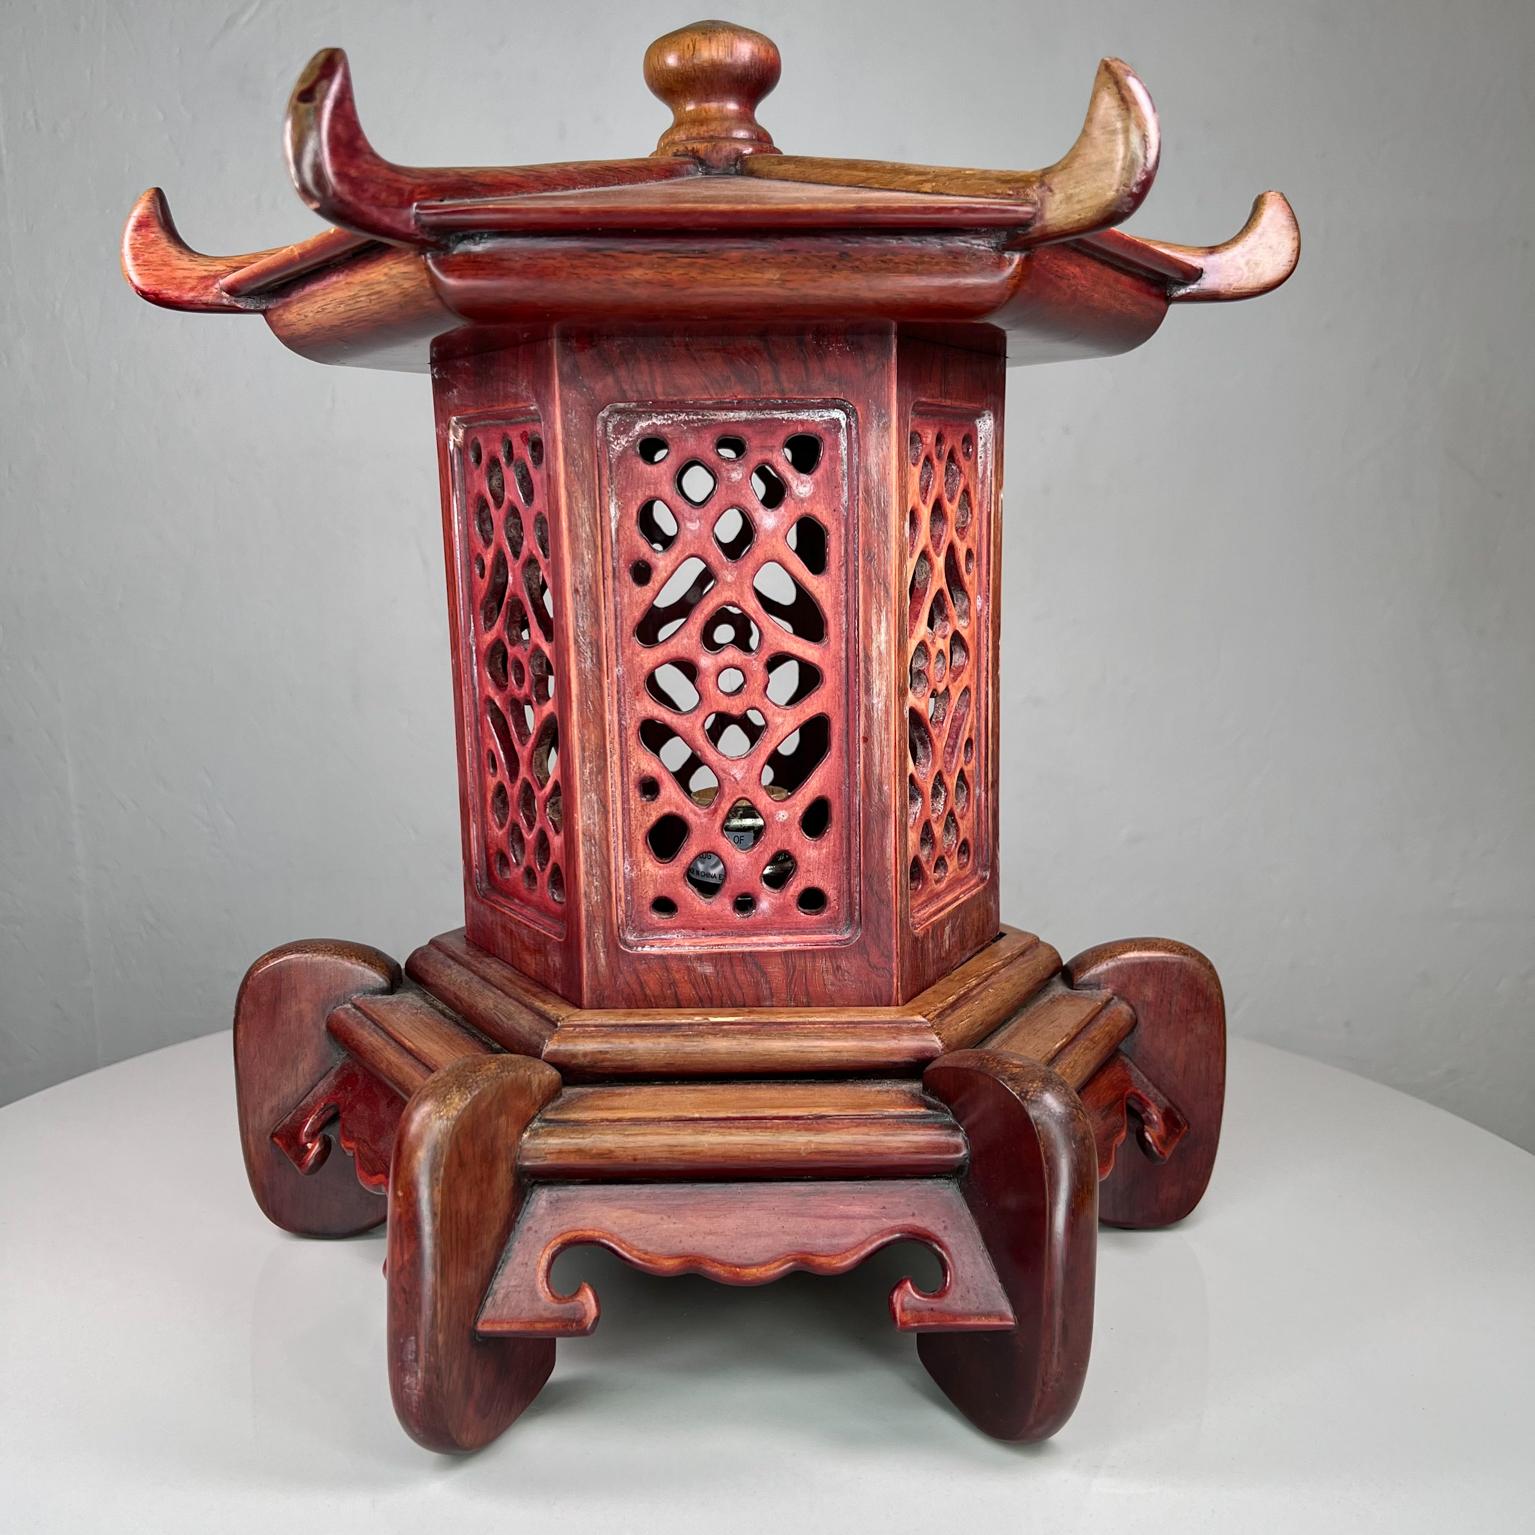 1950s Stunning Vintage Pagoda Table Lamp Intricate Handcrafted Wood For Sale 3